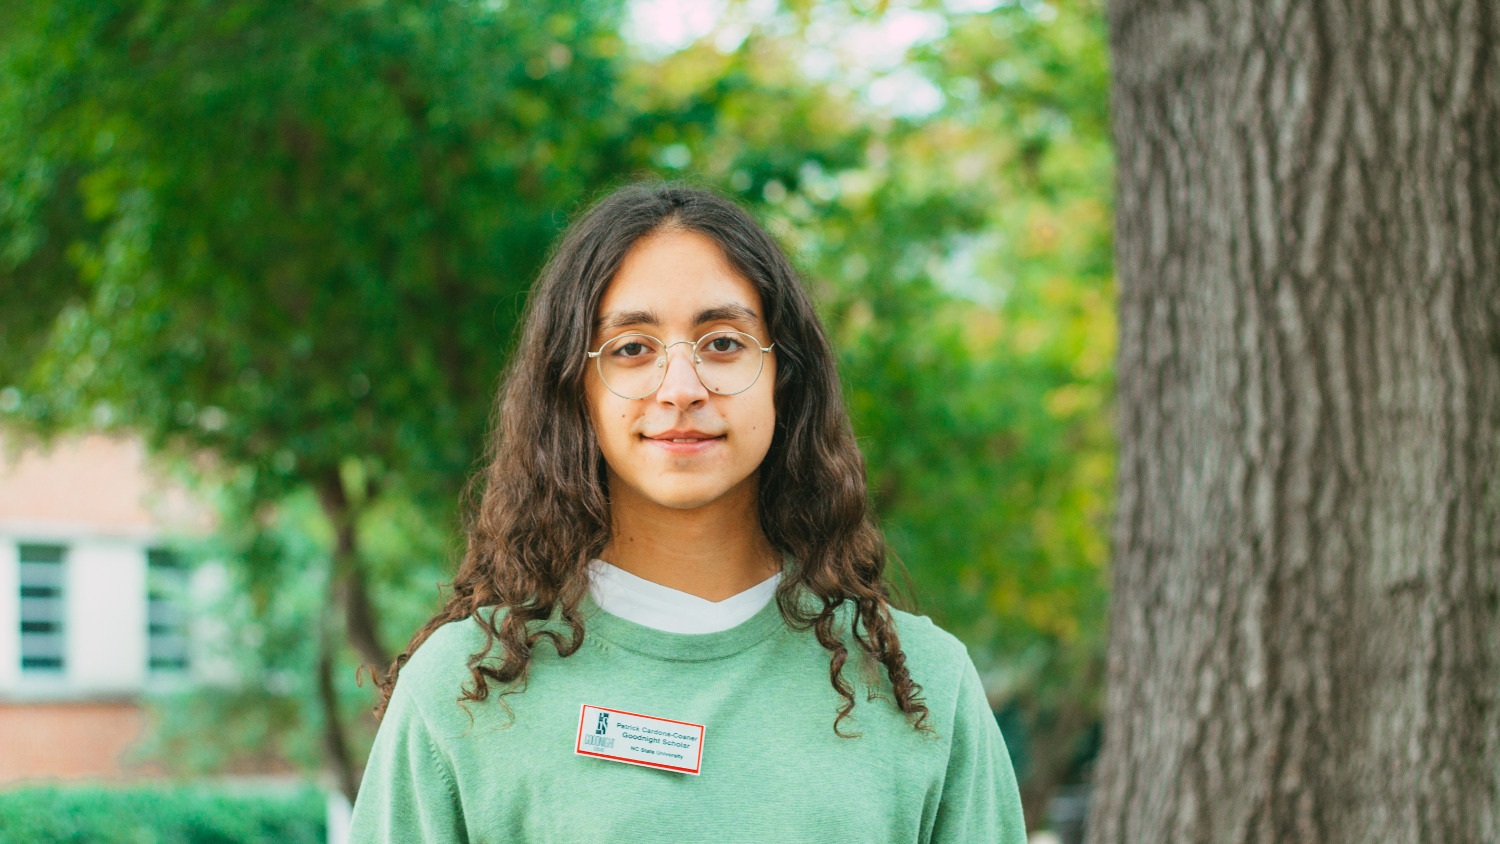 Patrick Cardona in front of a tree - Goodnight Scholar Q&A: A Conversation with Patrick Cardona - Forestry and Environmental Resources NC State University